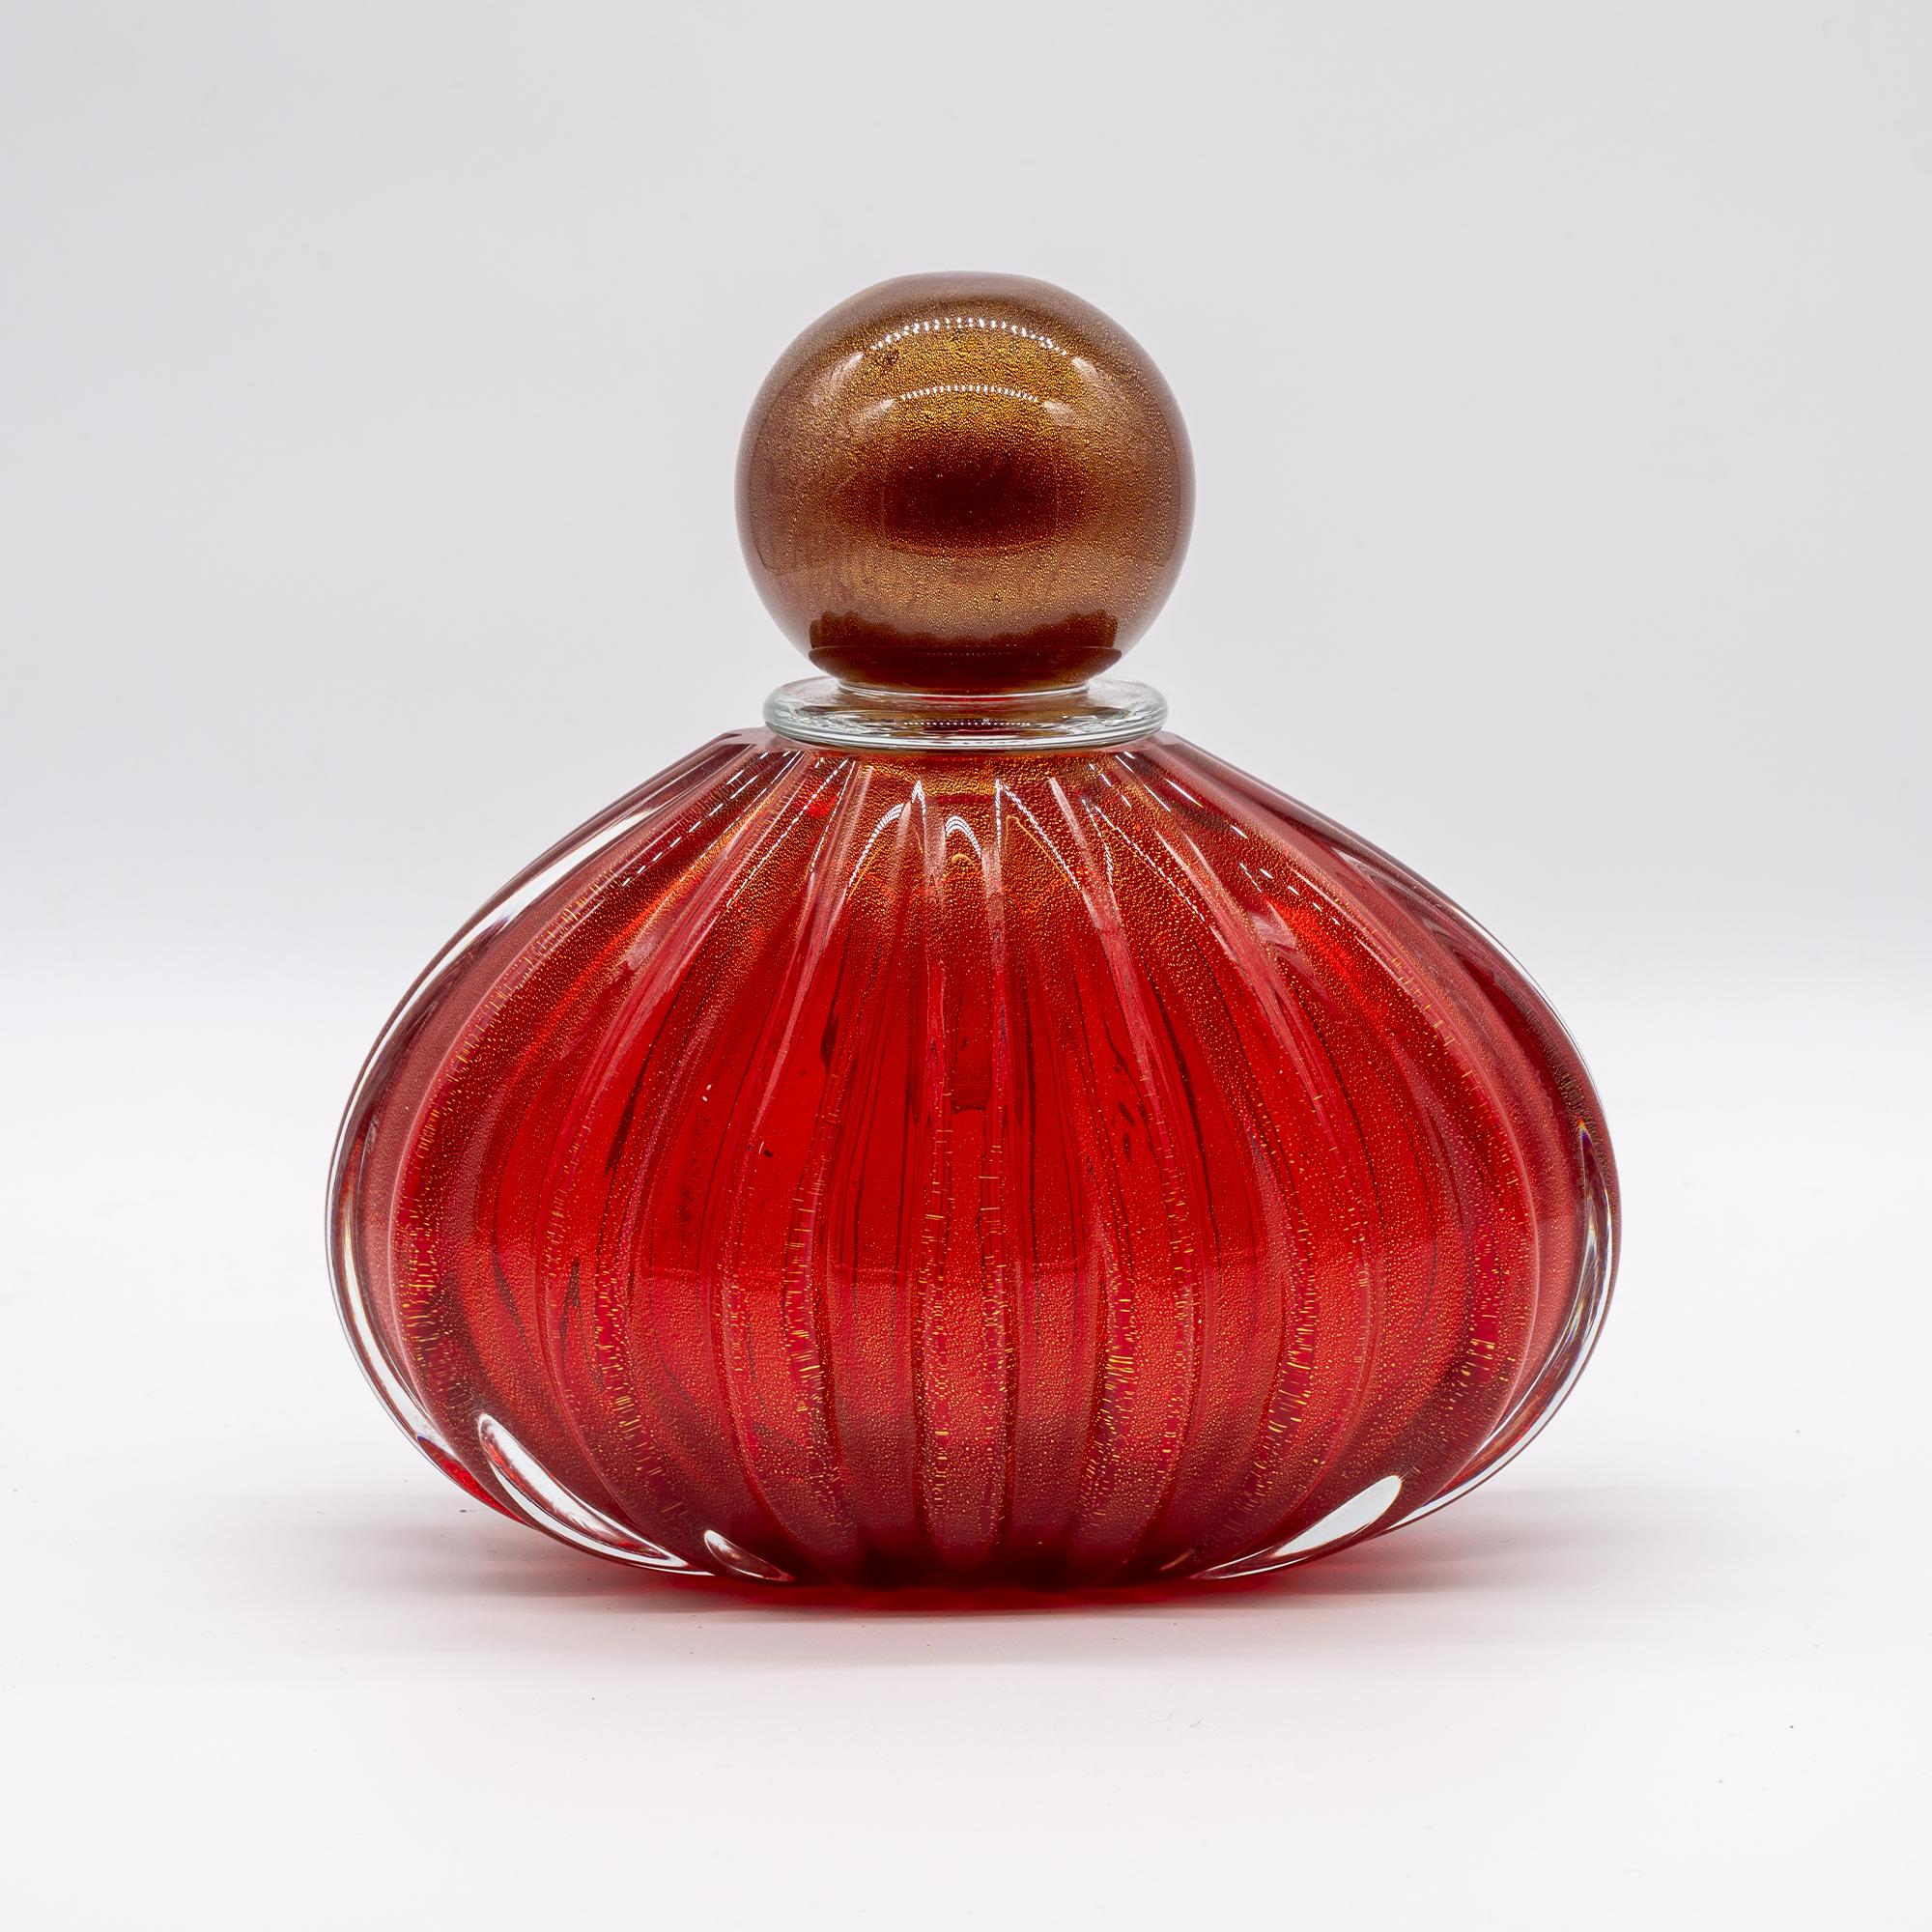 Murano glass parfum bottle vase, mouth blown, in red color. 
Made in Murano and purchased directly from the manufacturer.

Measures: 18cm diameter 20cm height

All of our glass items, vases, lights etc are truly made in Murano and we can